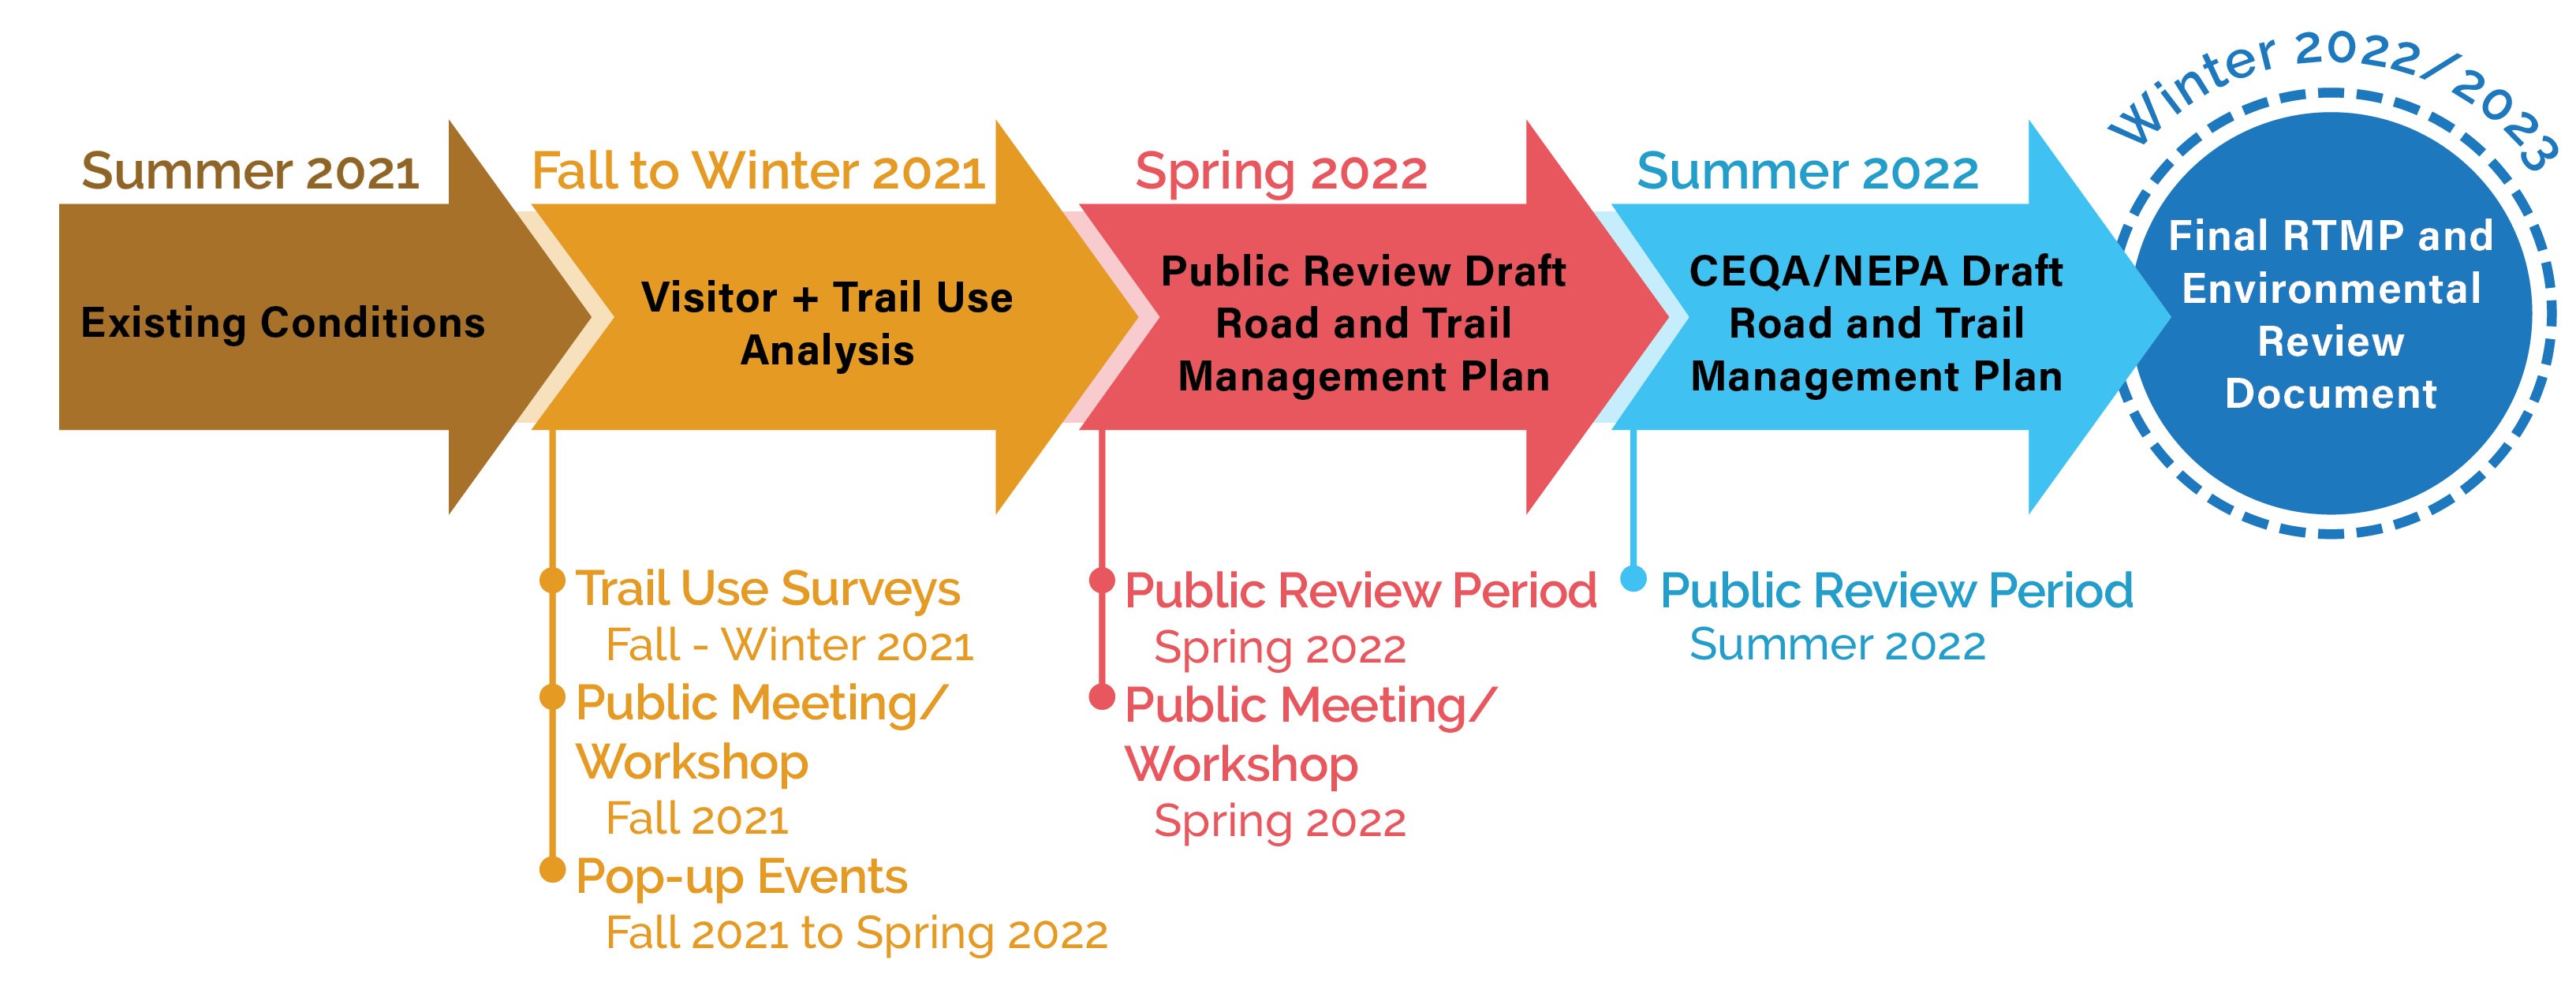 The image is a graphical representation of the following planning schedule: Summer 2021-Existing Conditions Fall/Winter 2021-Visitor and Trail Use Analysis (Trail use surveys, Public meetings/workshops, Pop-up Events) Spring 2022- Public meeting/workshop and review period Summer 2022- CEQA/NEPA Draft Road and Trail Management Plan Public review period Winter2022/2023- Final Road and Trail Management Plan and Environmental Review Document